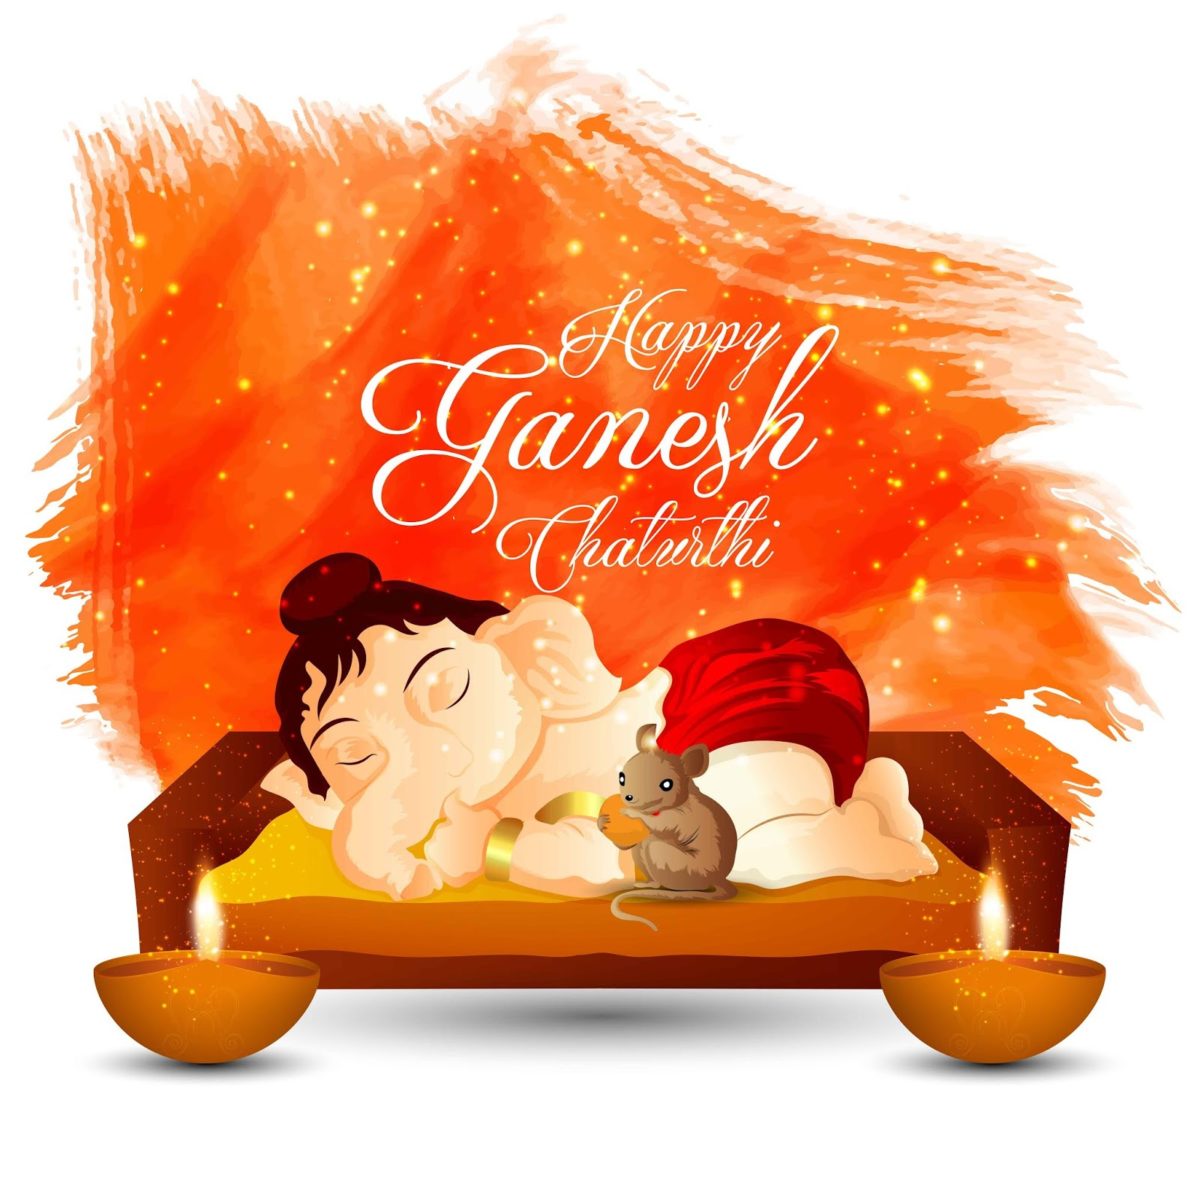 Happy Ganesh Chaturthi 2020 Hd Images 4k Wallpapers Ultra Hd Photos And Dp Photographs For 3559